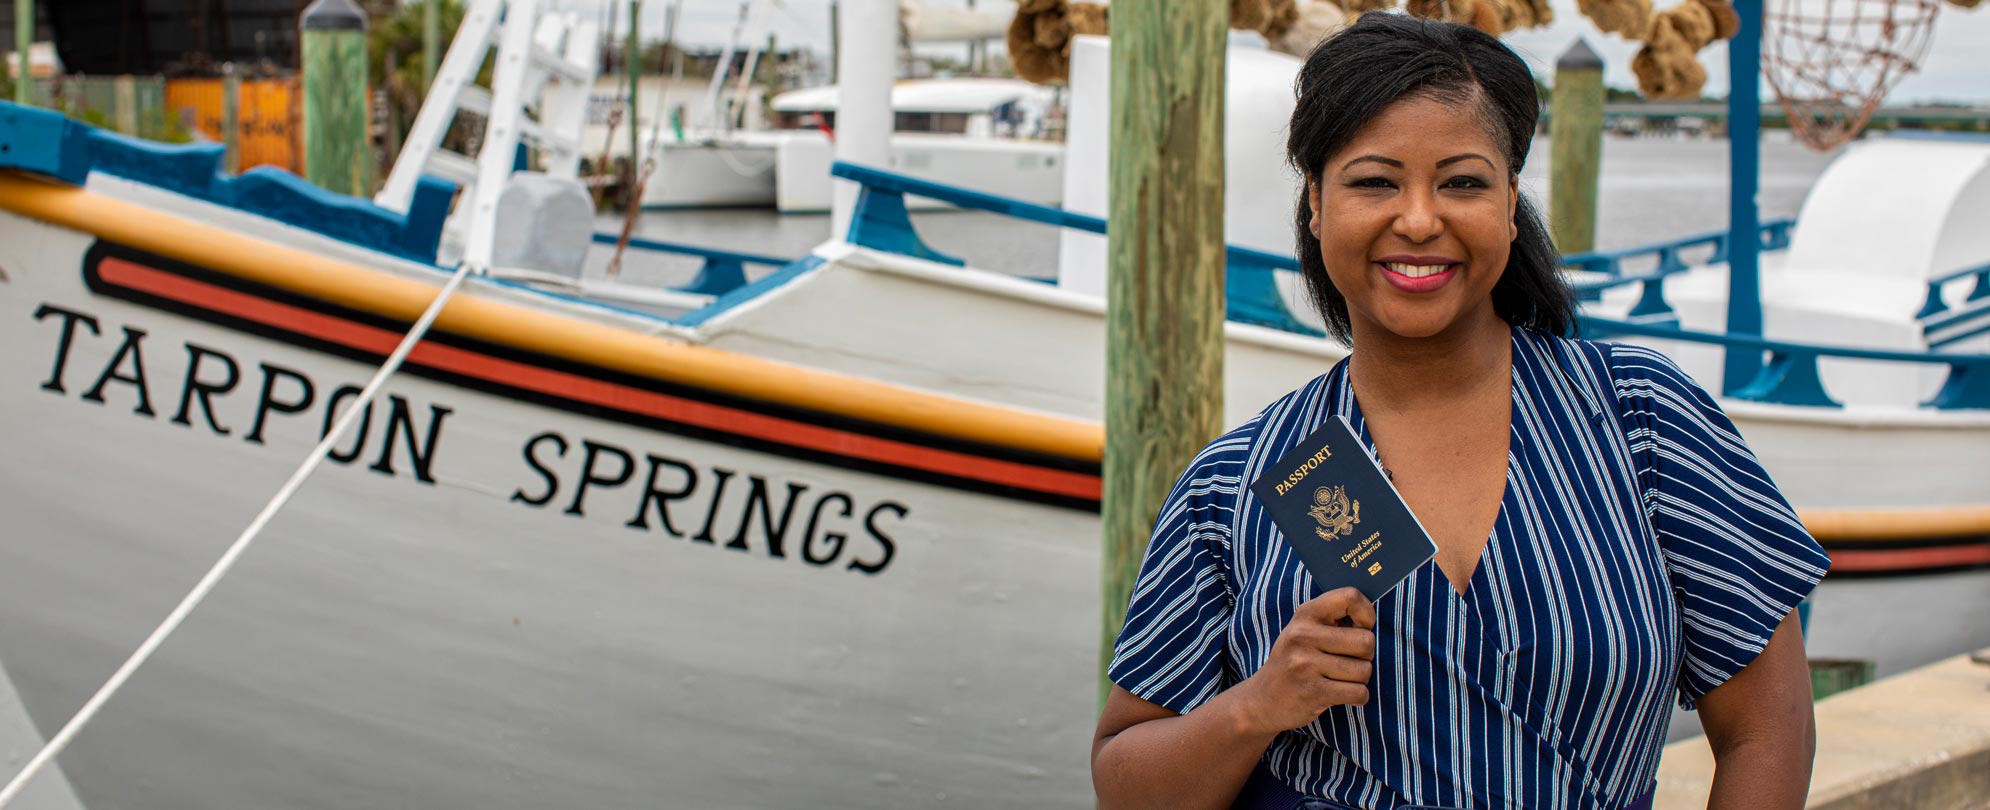 A woman smiling and holding up a passport in front of a Tarpon Springs boat.